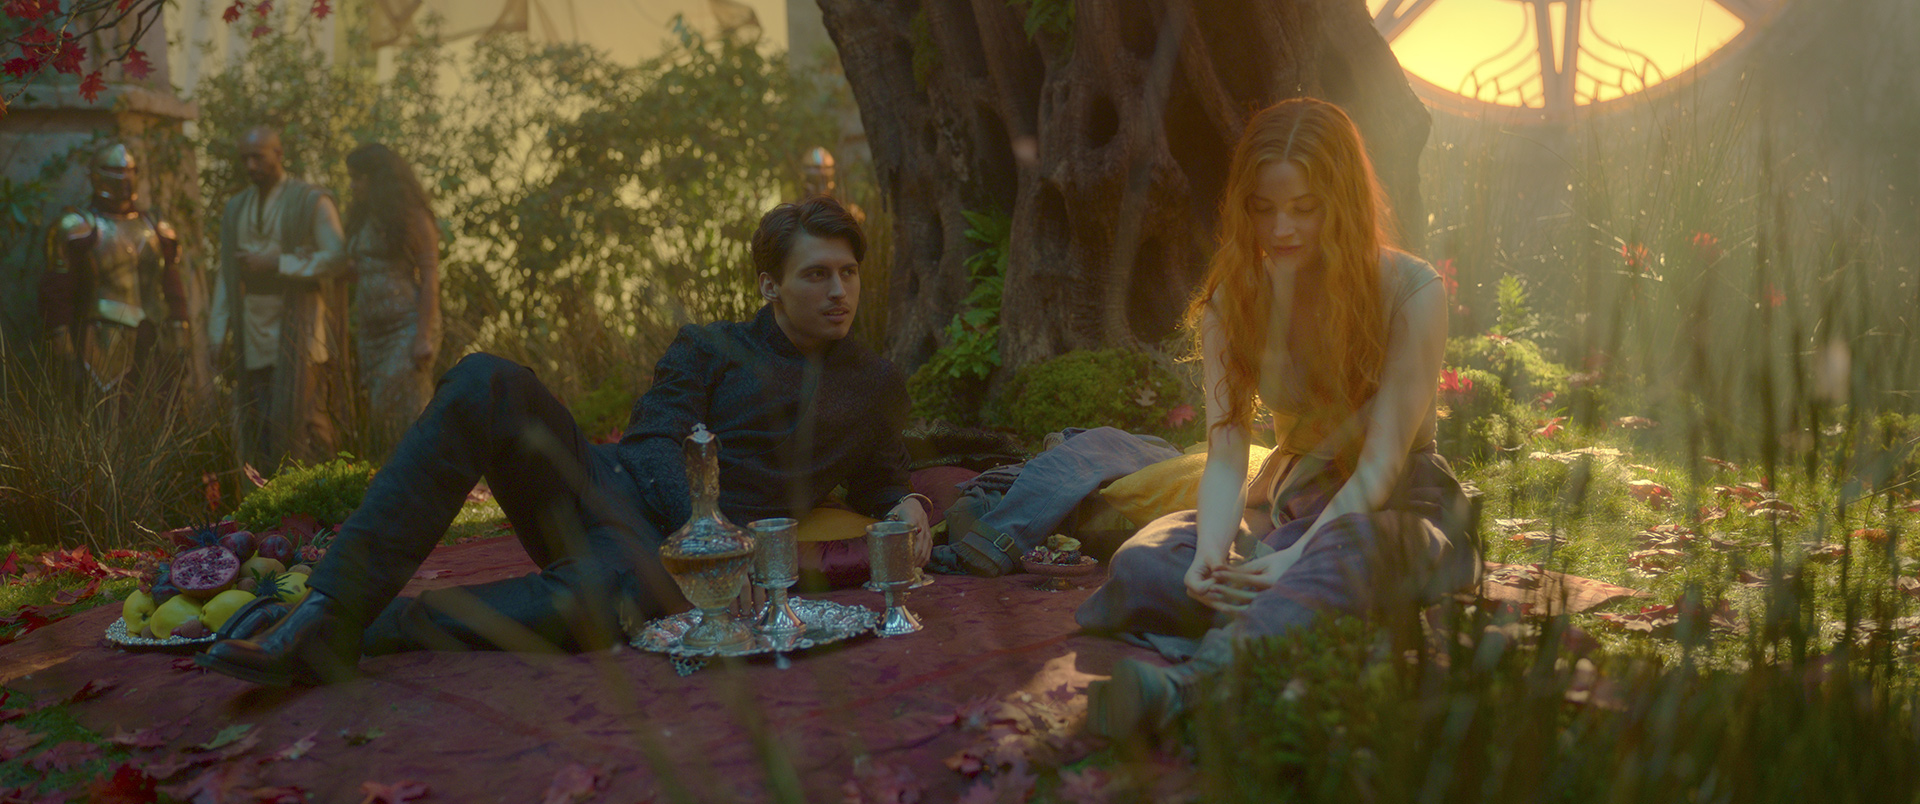 In the Wyrm's illusion, Airk and Elora share another picnic, reminiscent of simpler times, and the sorcerer admits how difficult she has found this revelation of her true identity.